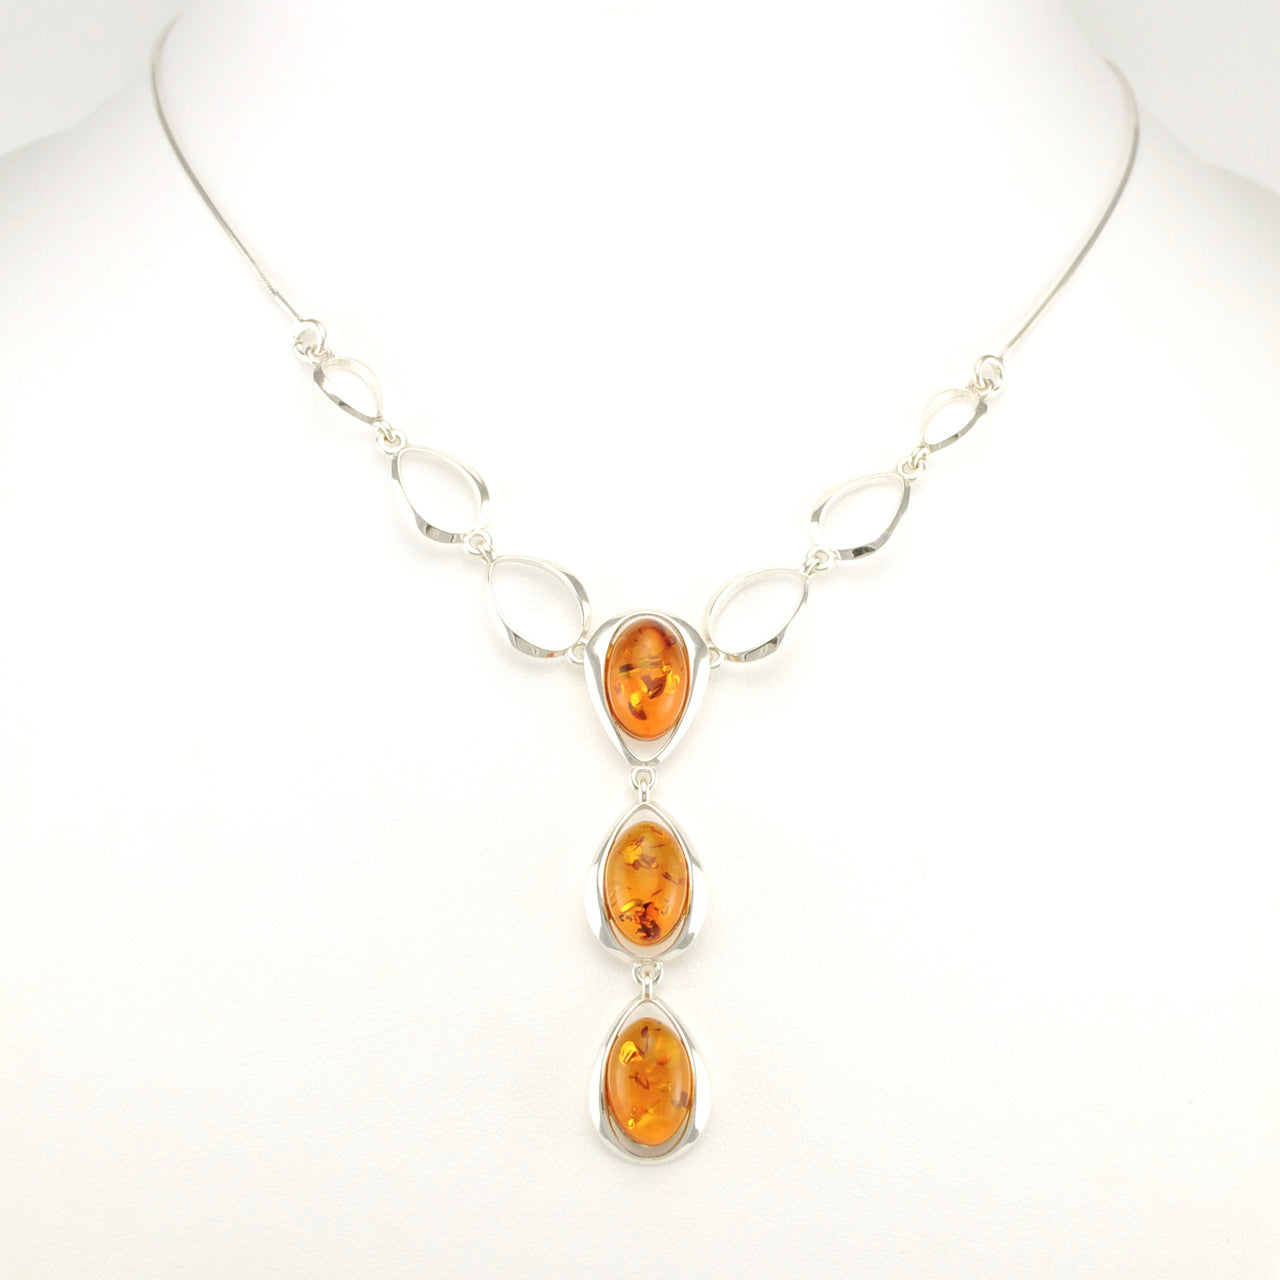 Alt View Sterling Silver 3 Oval Baltic Amber Drop Necklace with Open Ovals